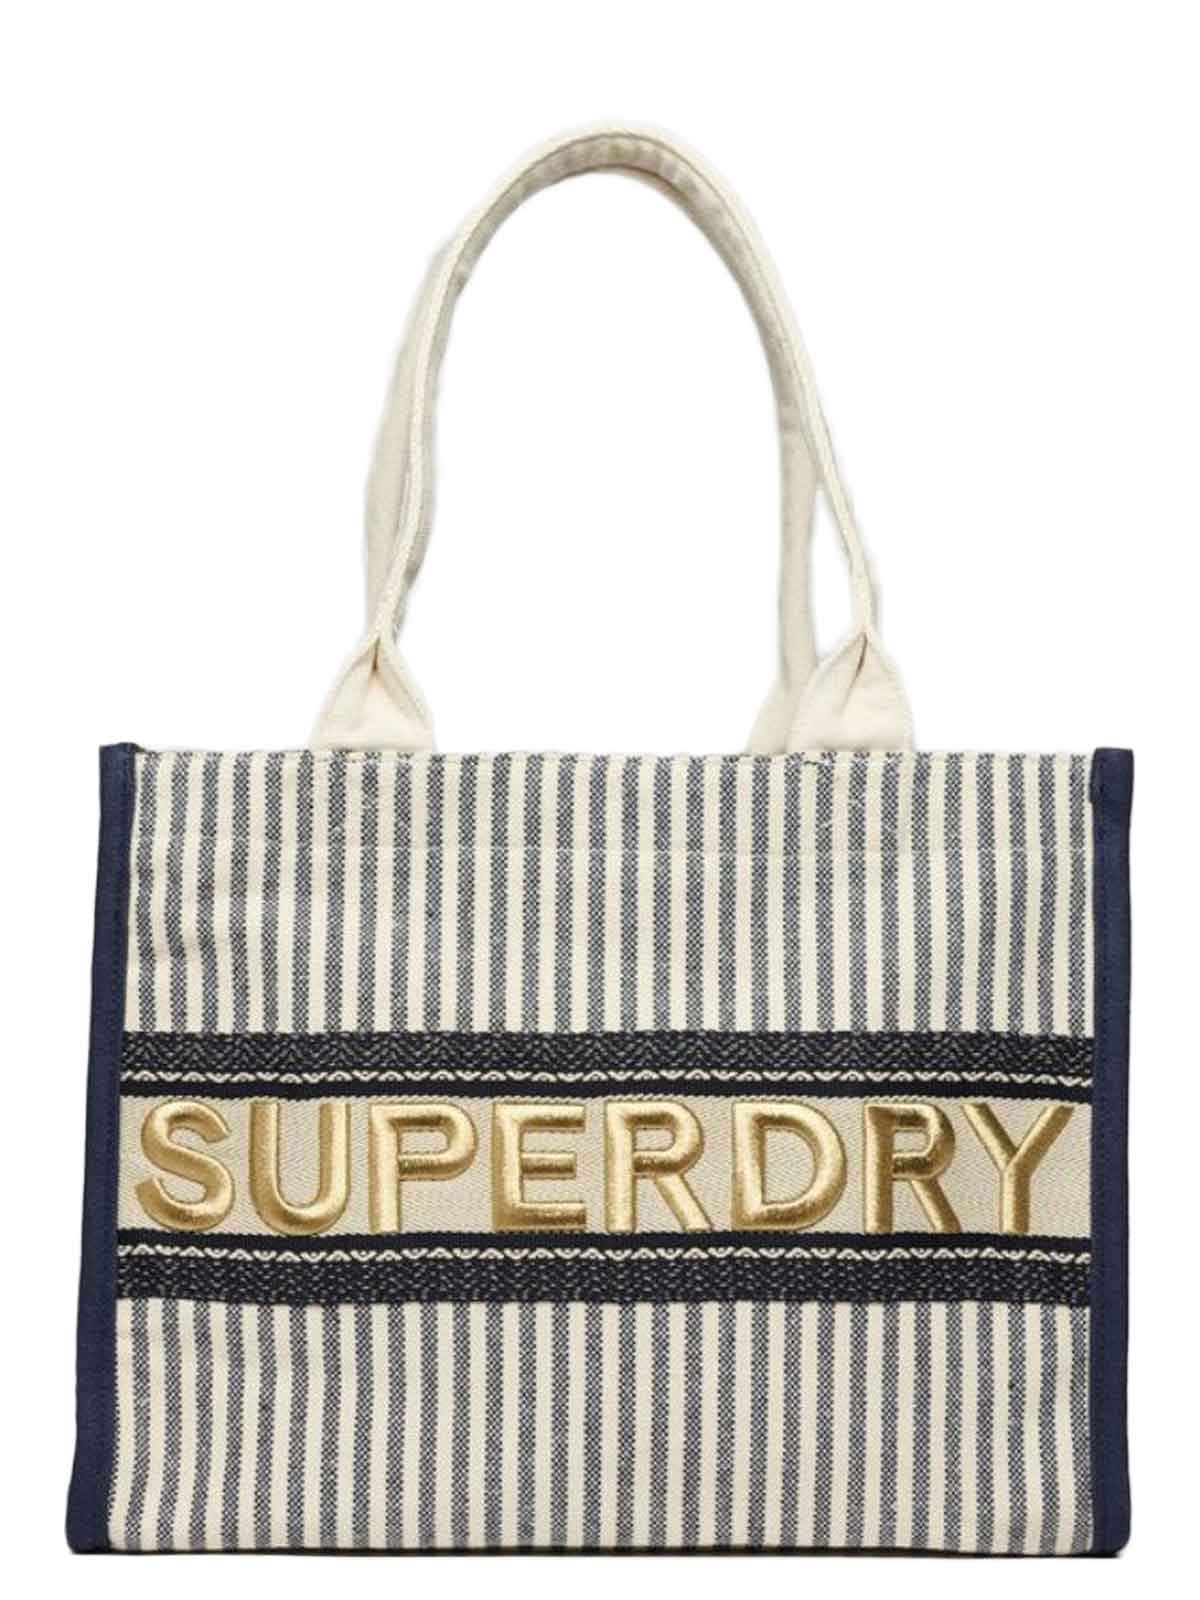   Superdry | Luxe Tote Bag Stripe |  